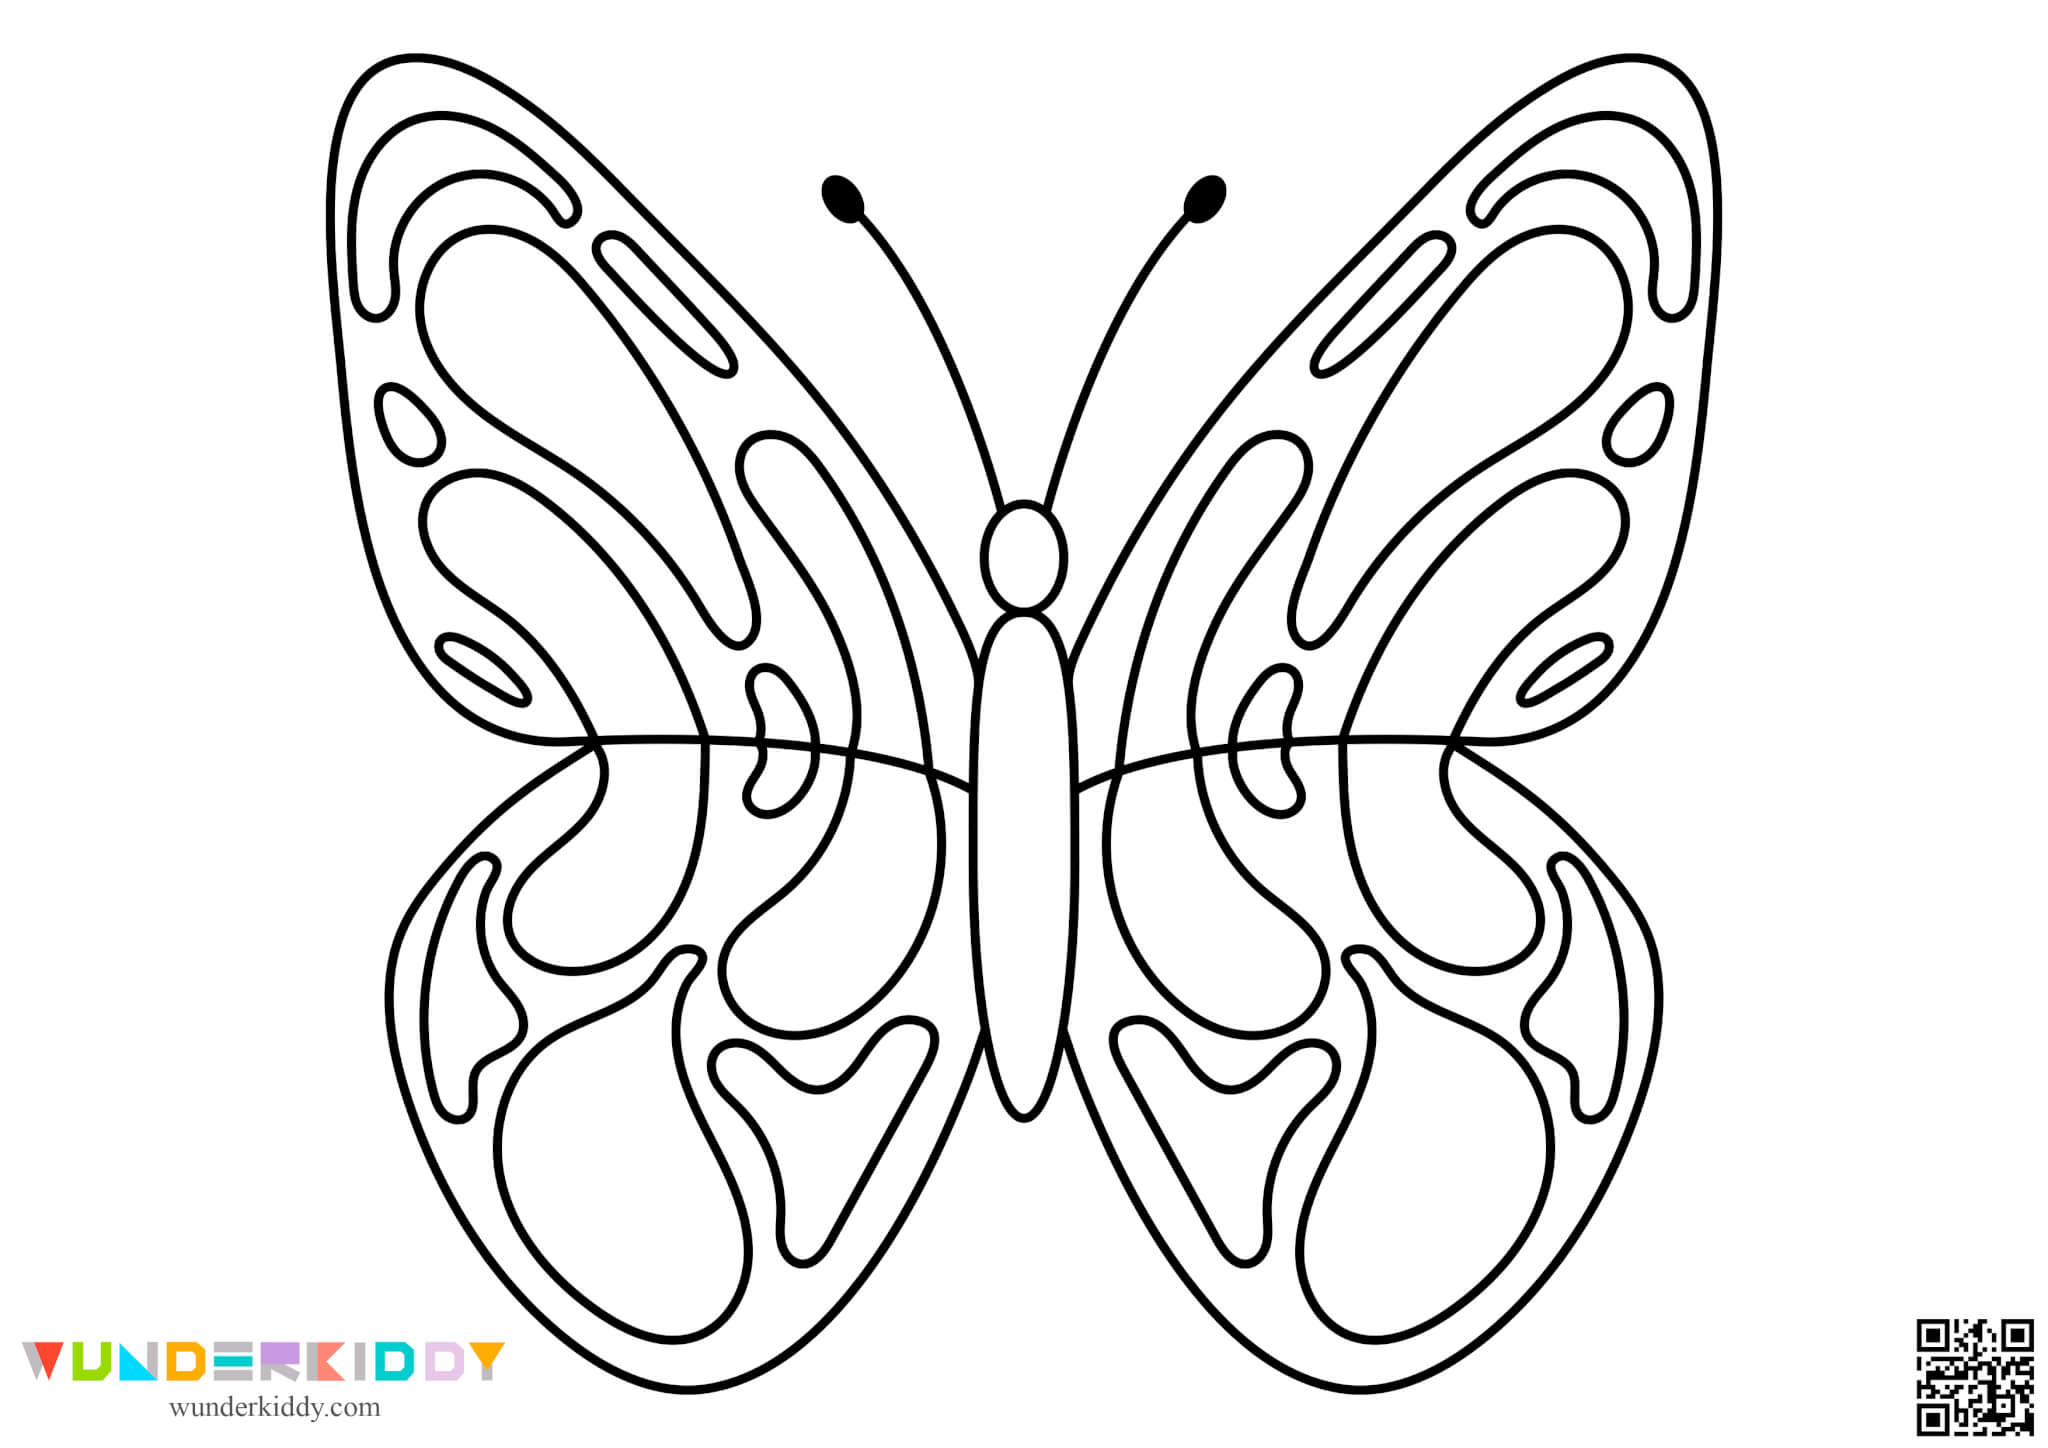 Butterfly Template Printable - Image 11